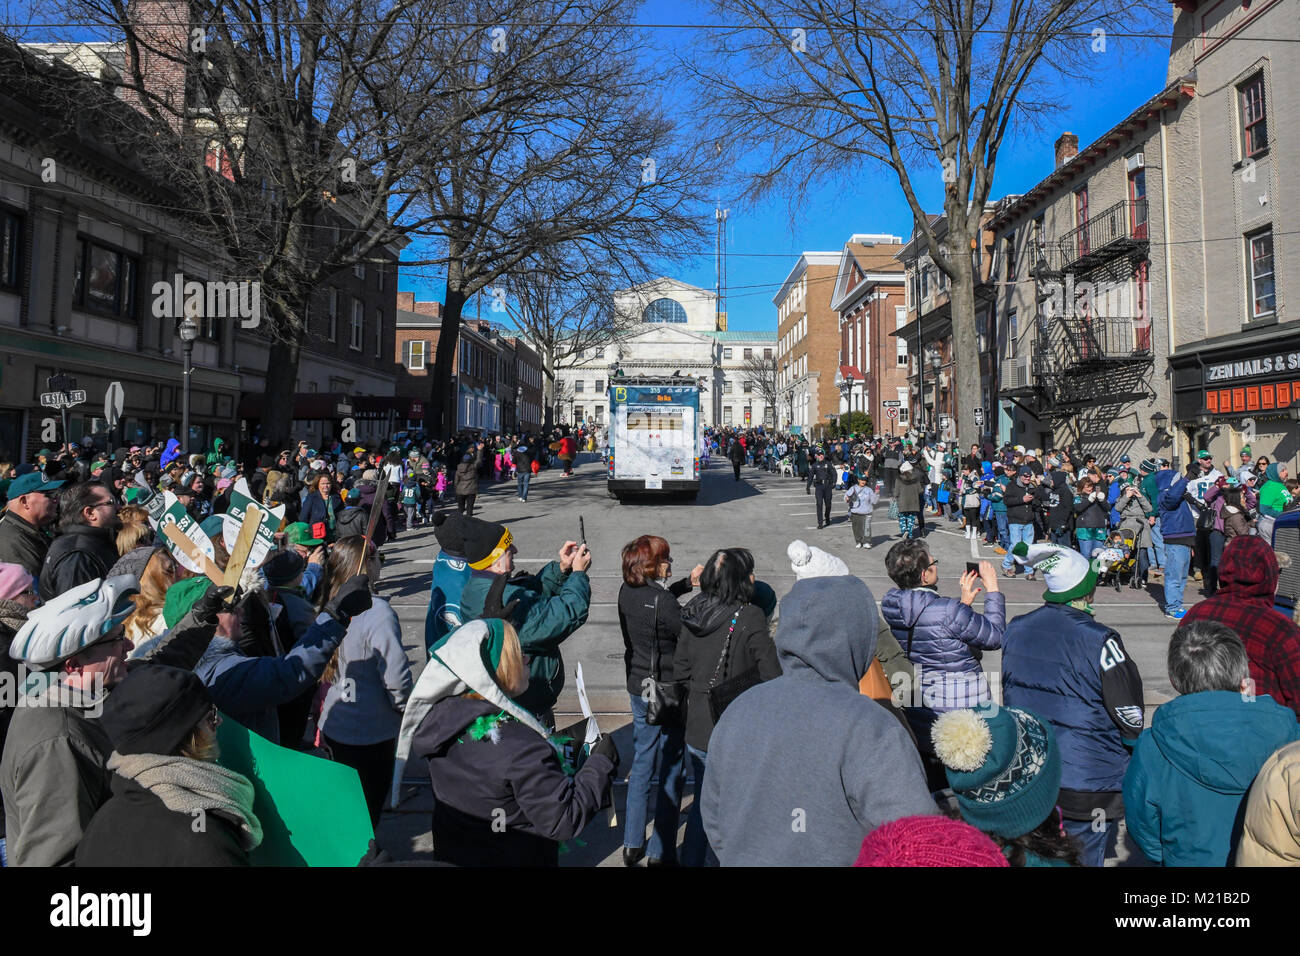 Media, PA, USA, Thousands of Philadelphia Eagles fans line the streets of Media for a rally supporting the NFC Championship Philadelphia Eagles in their pursuit of winning the NFL Super Bowl. Media, Delaware County, PA is located approximately 14 miles South of Philadelphia, PA. Temperatures in the mid 20 degree range (fahrenheit) Credit: Don Mennig/Alamy Live News Stock Photo